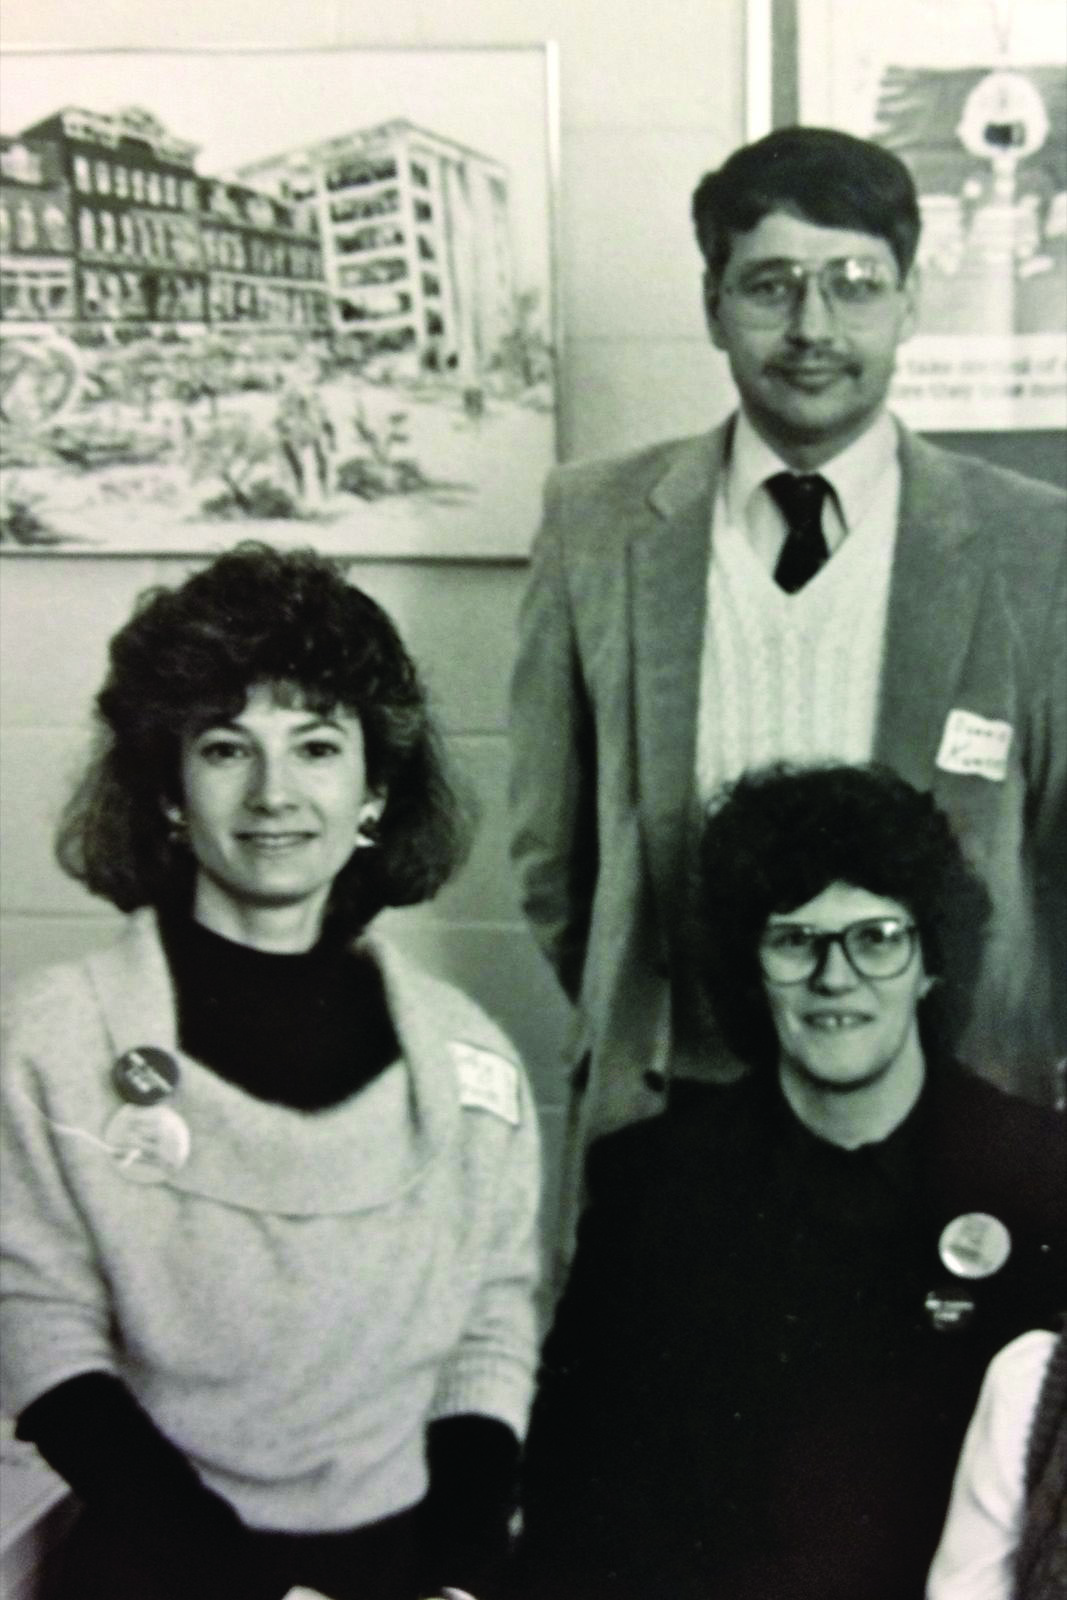 Cathy Glaude, Doris Ray and Dennis Kunces (back) at a professional development training in Machias, Maine 1988